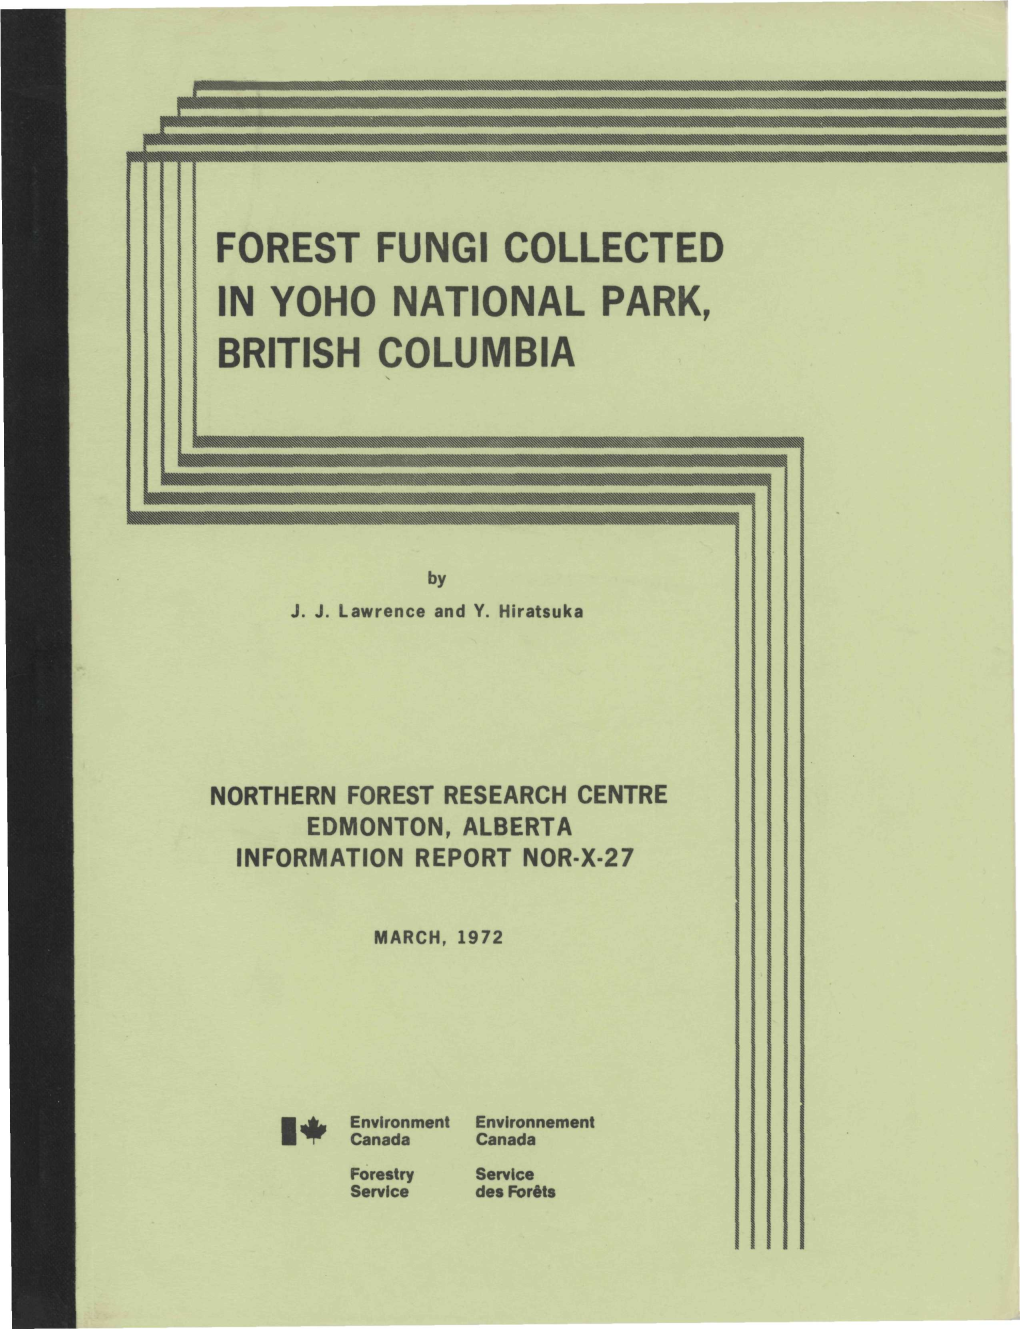 Forest Fungi Collected in Yoho National Park, British Columbia